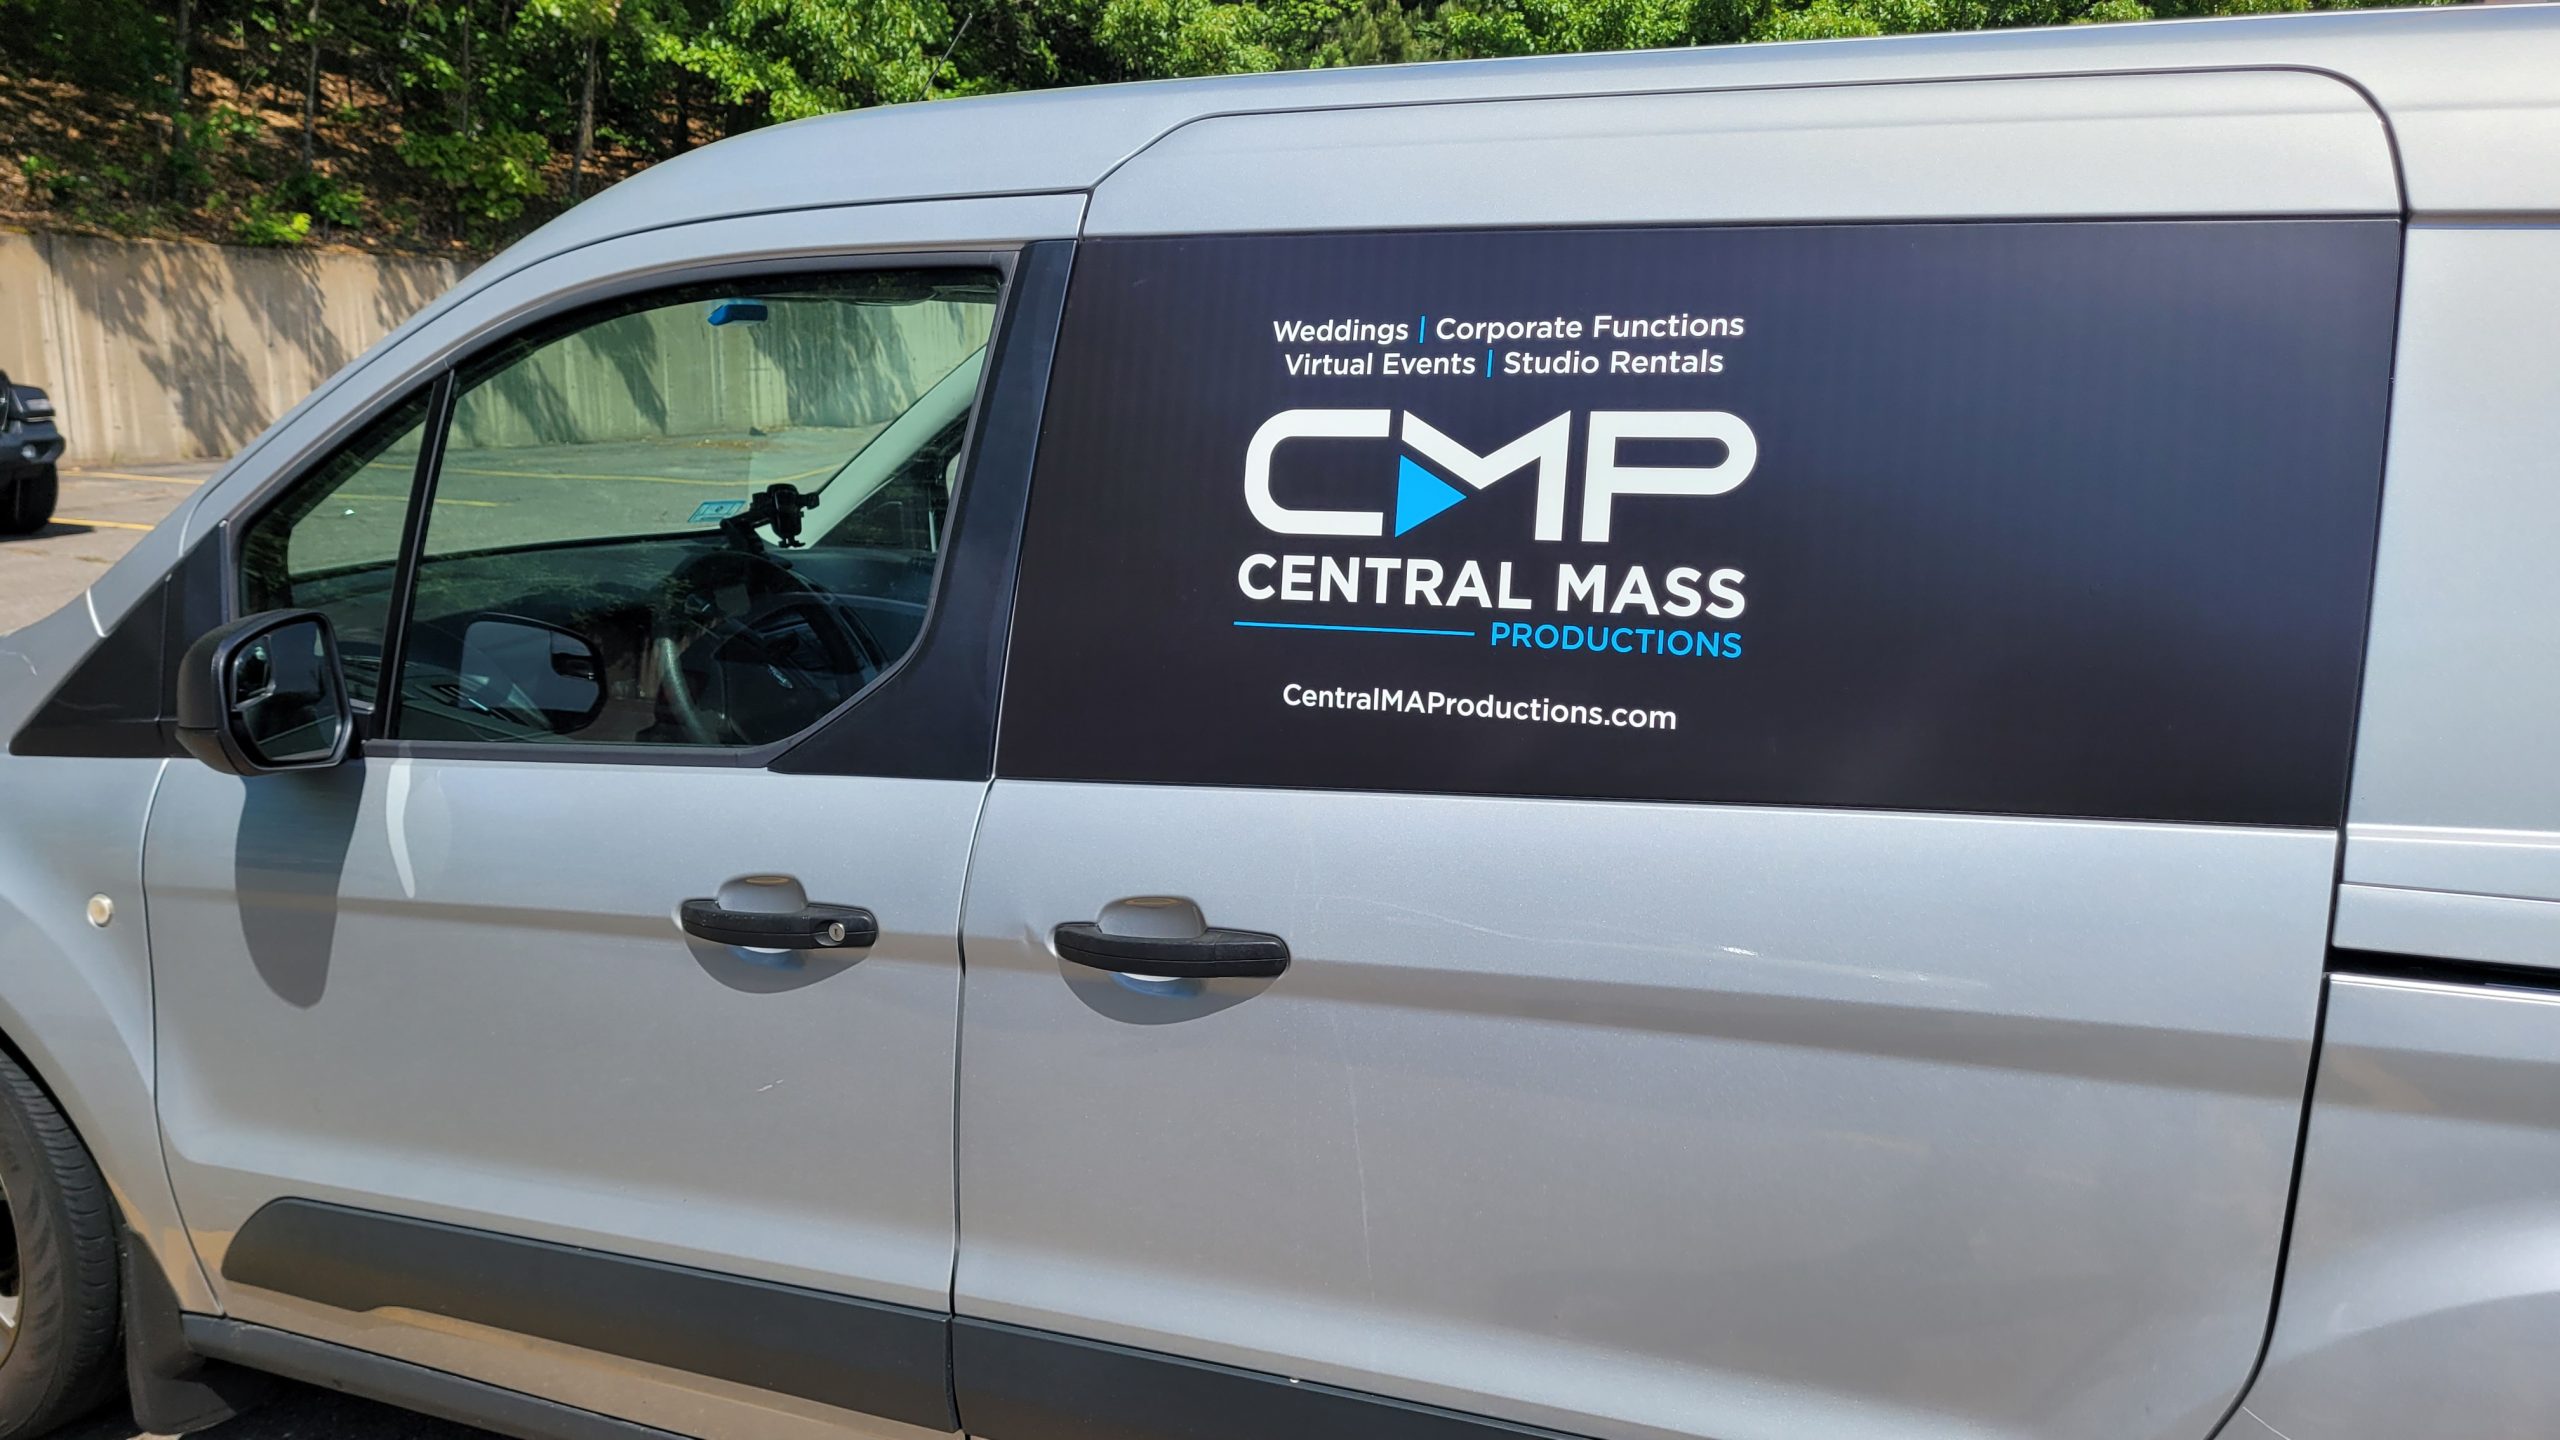 Central Mass Productions production van weddings corporate functions virtual events studio rentals